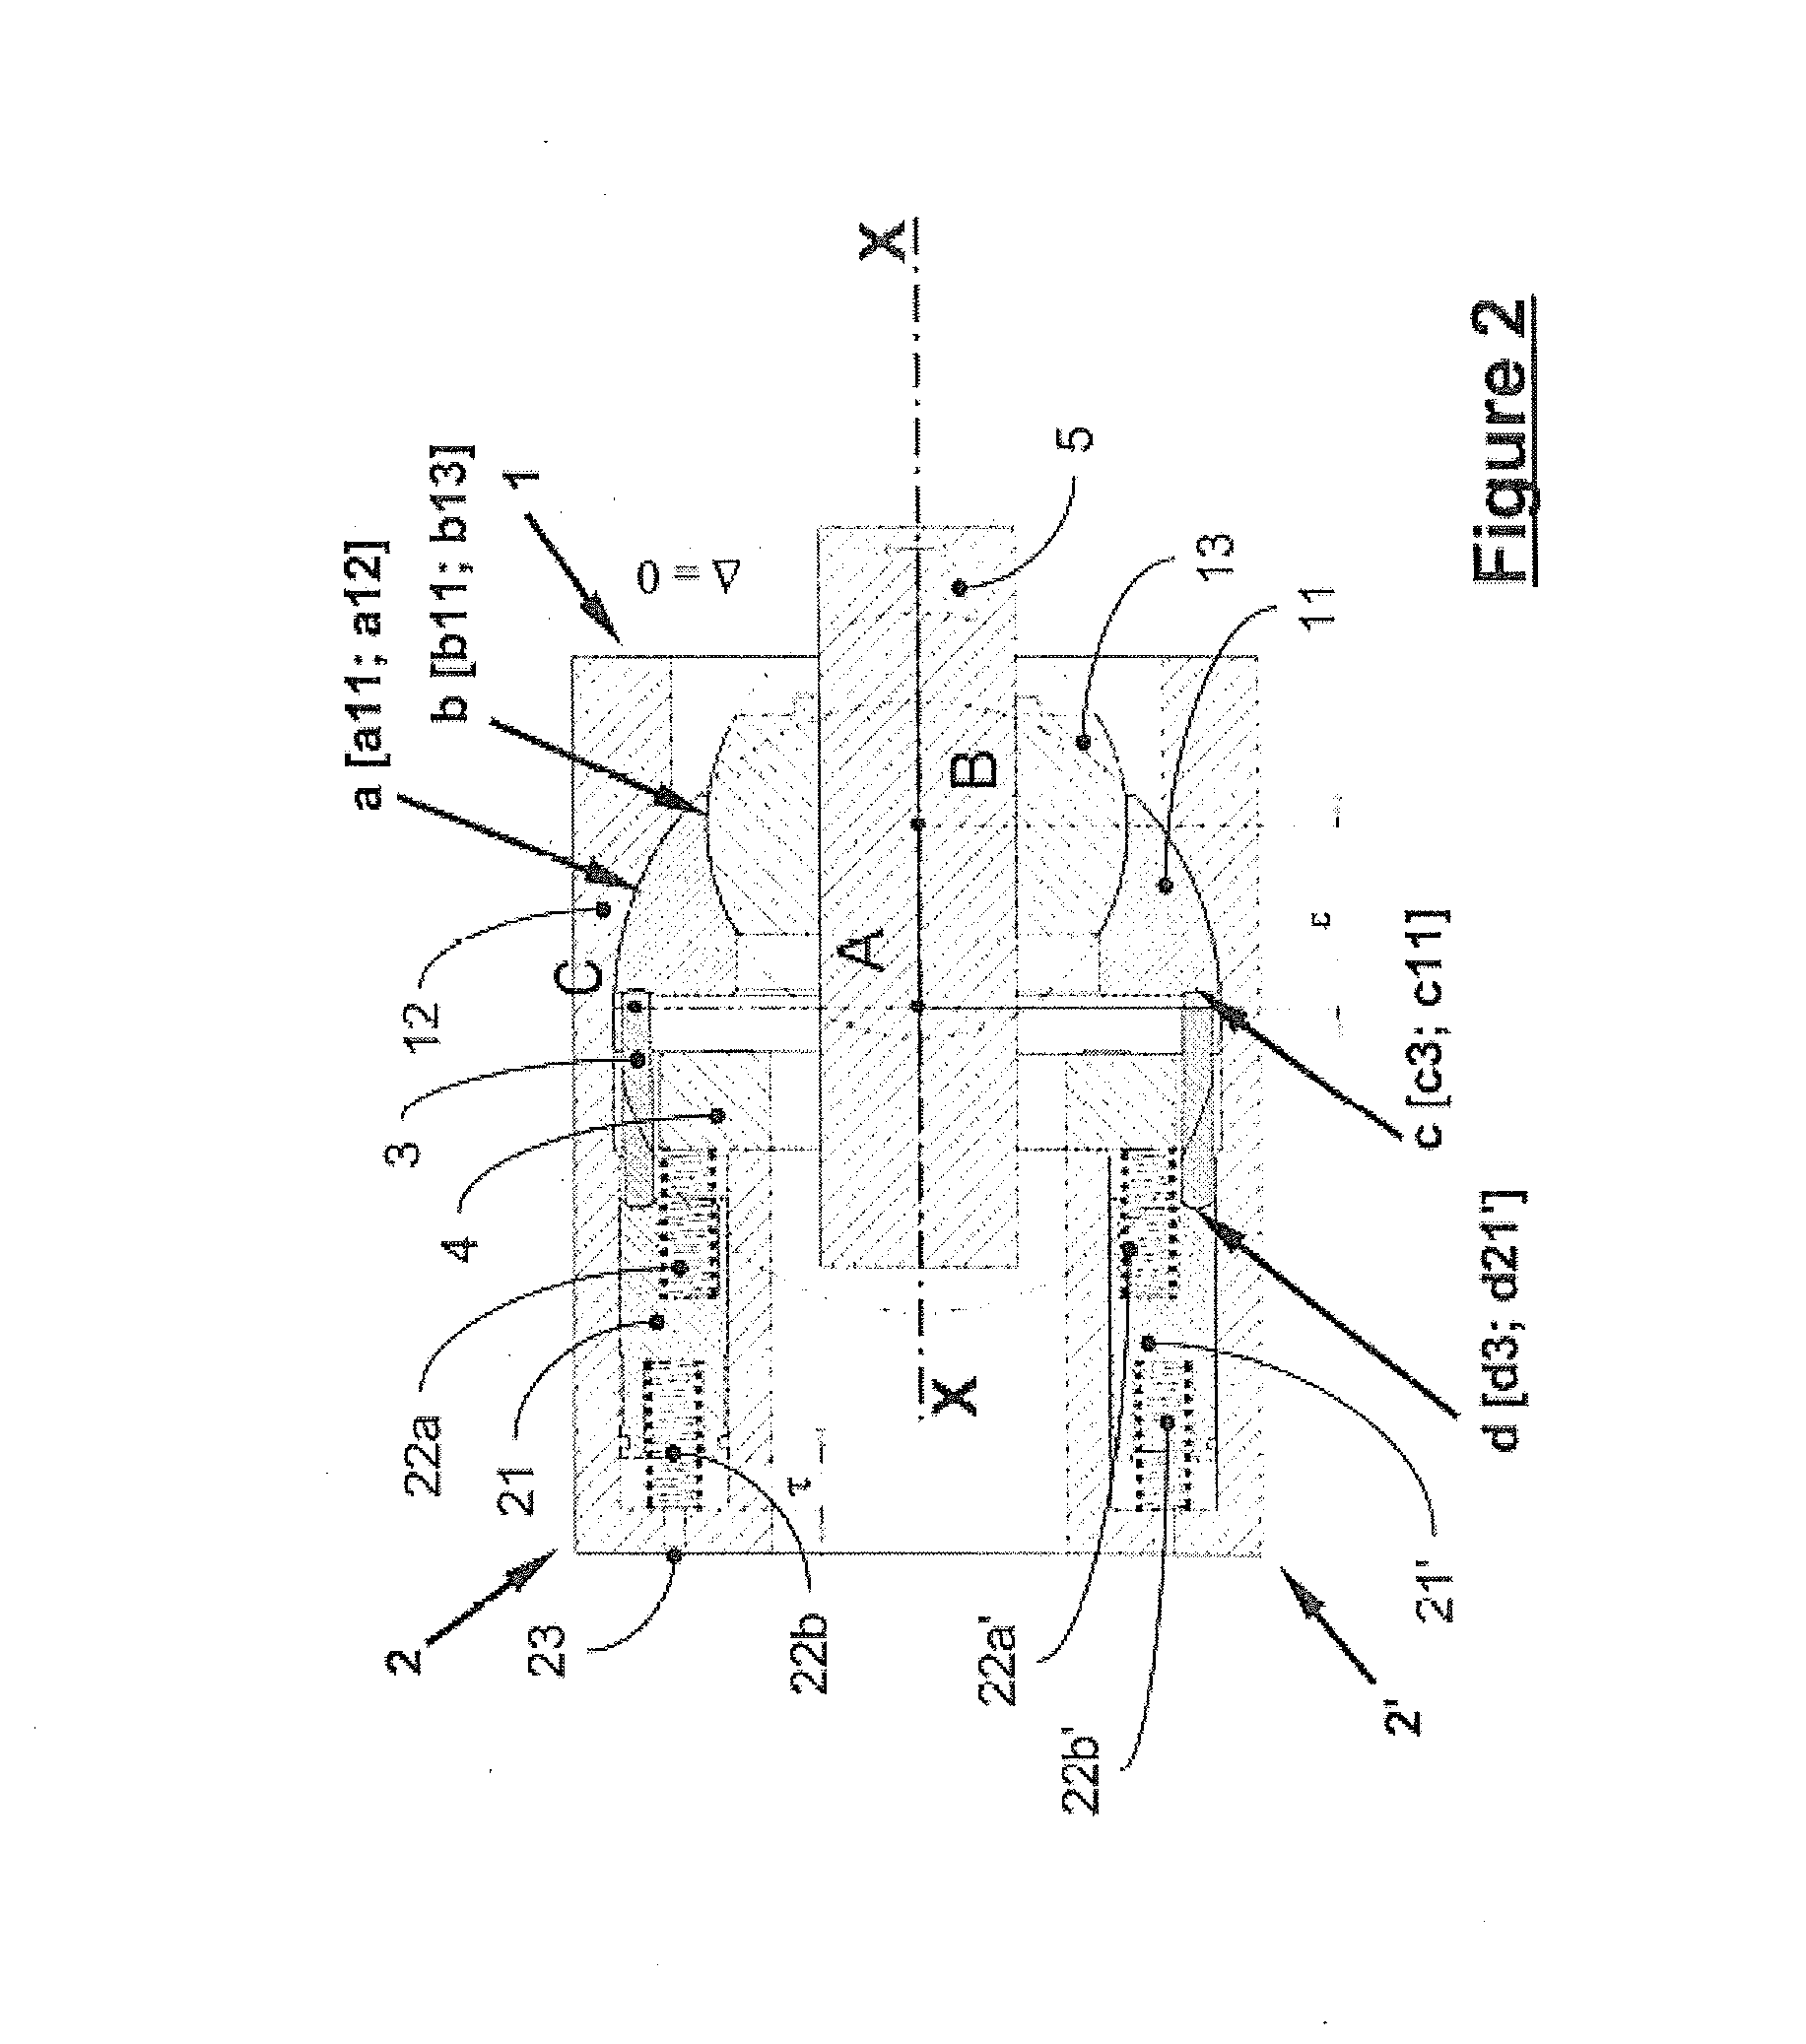 Annular Device for Radial Displacements of Interconnected Parts